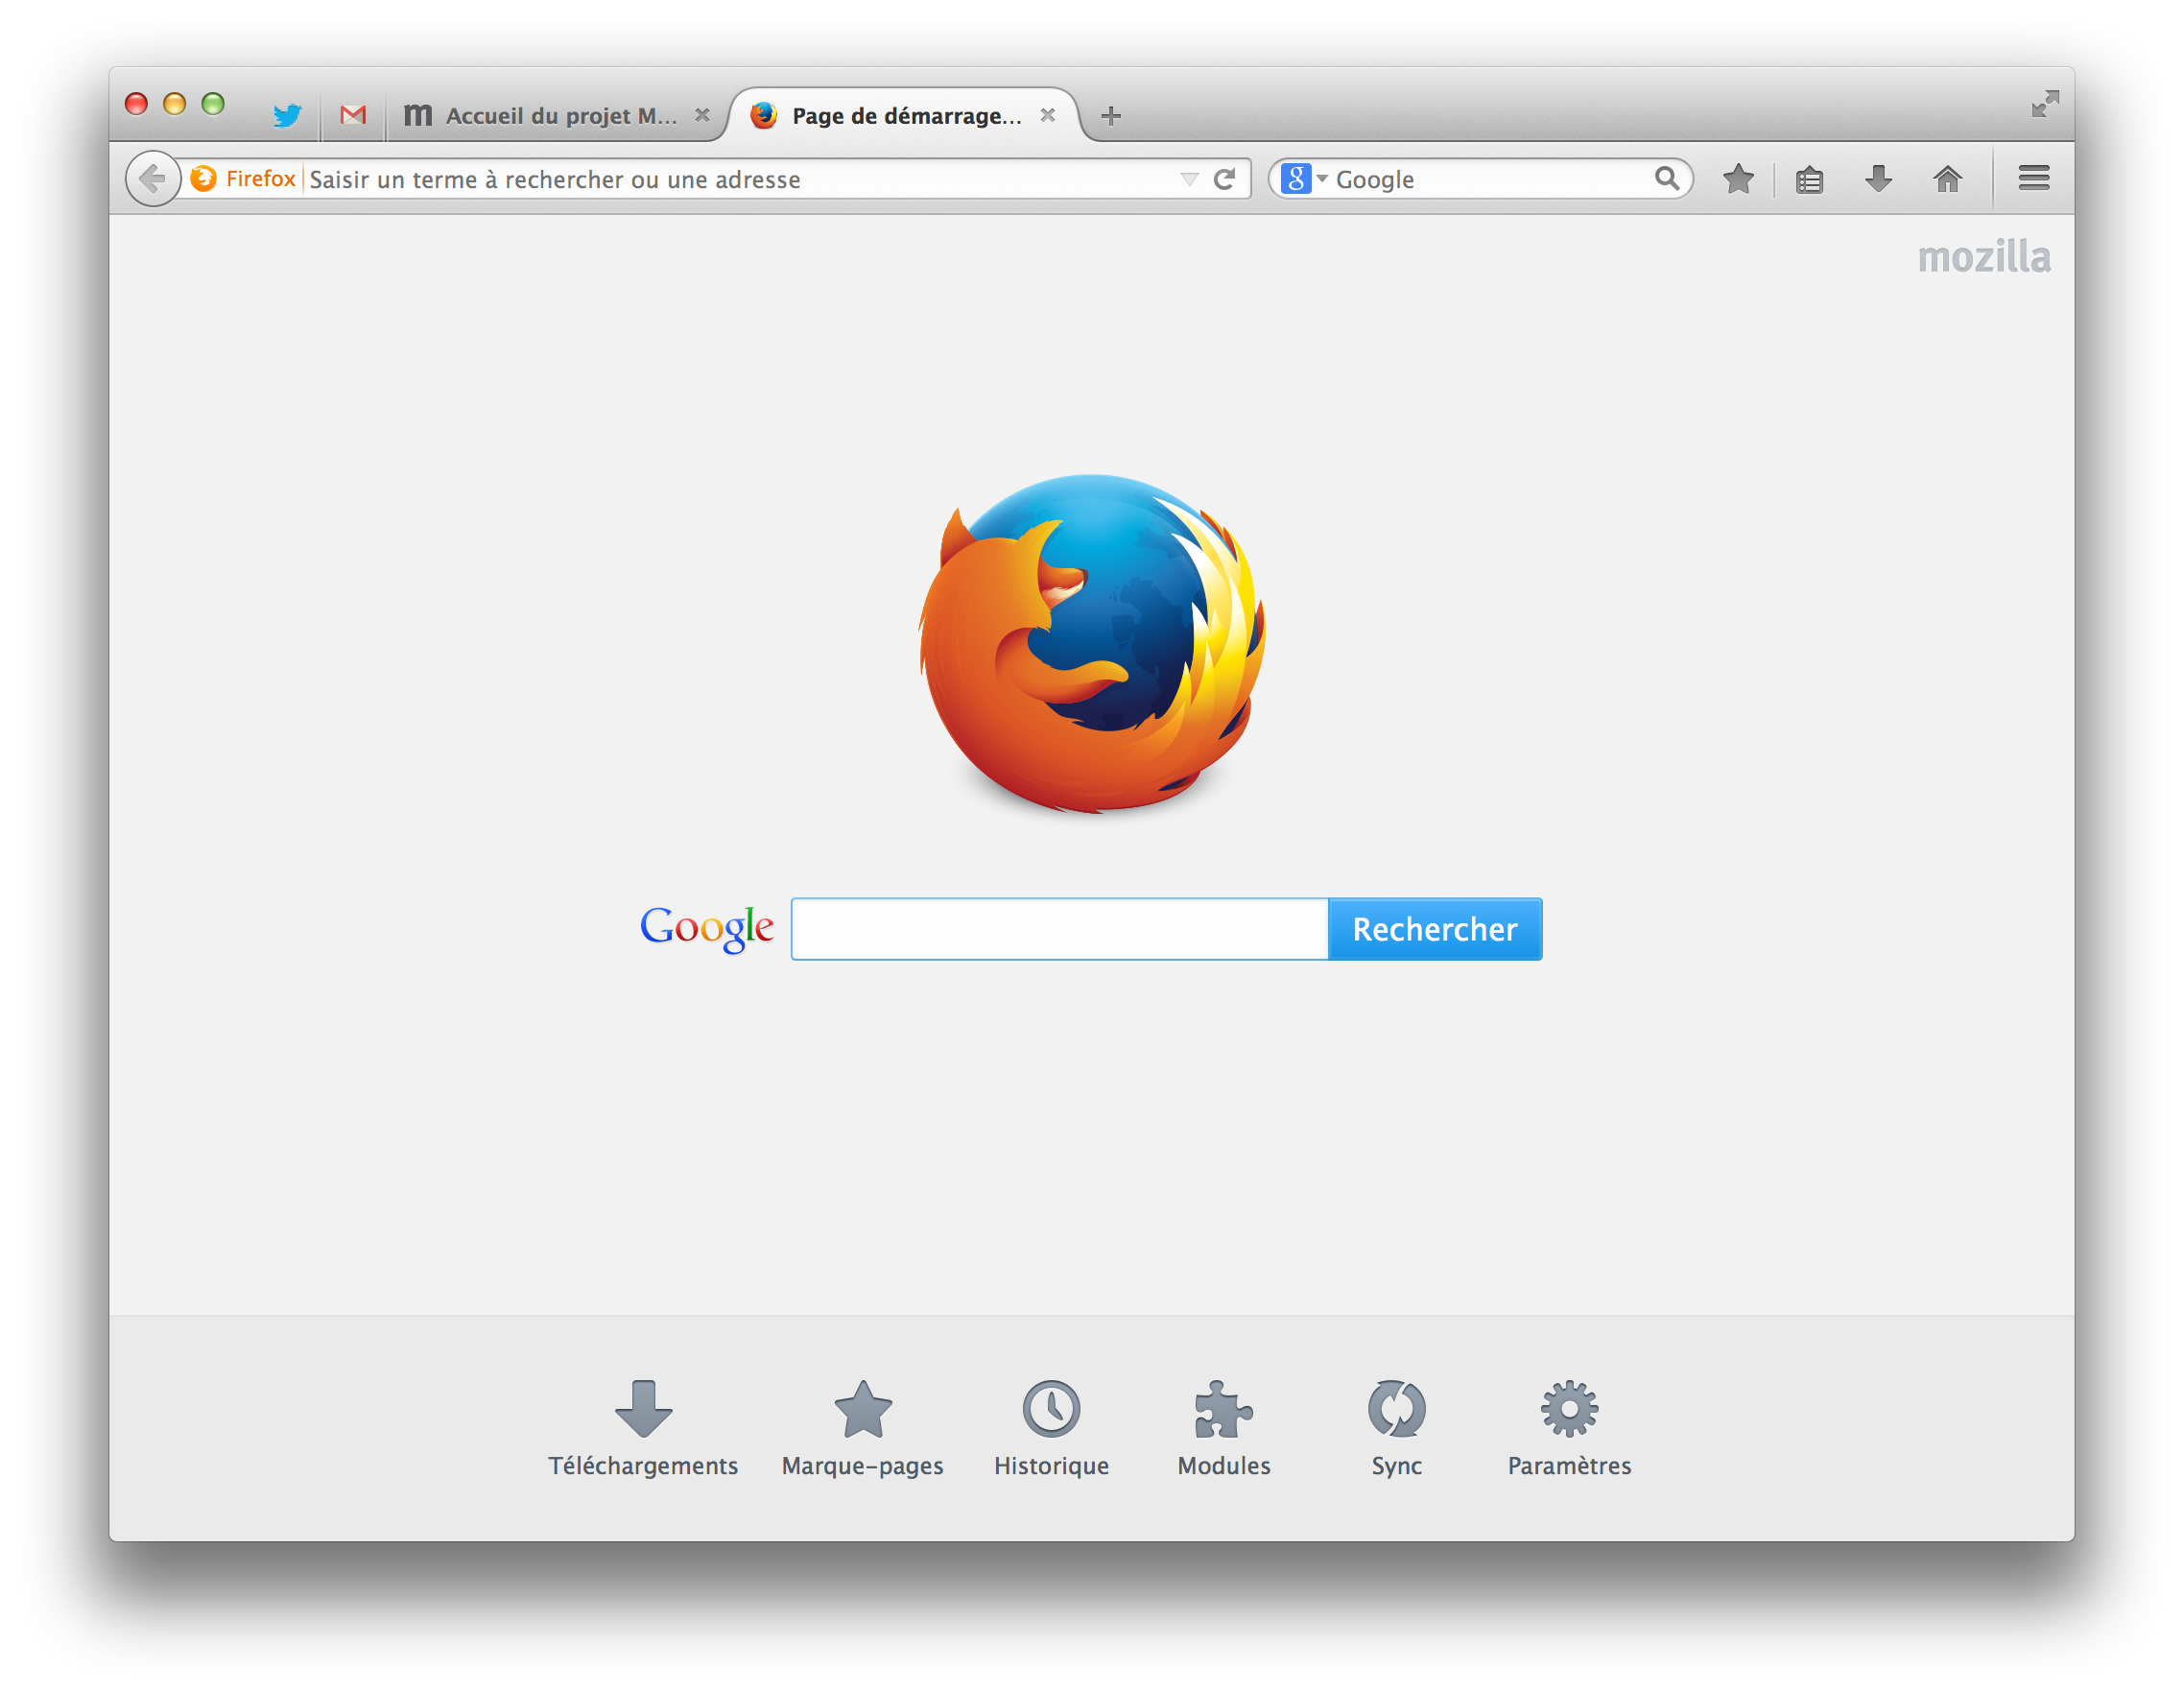 download mozilla firefox 5.0.1 for mac os x 10.7 lion